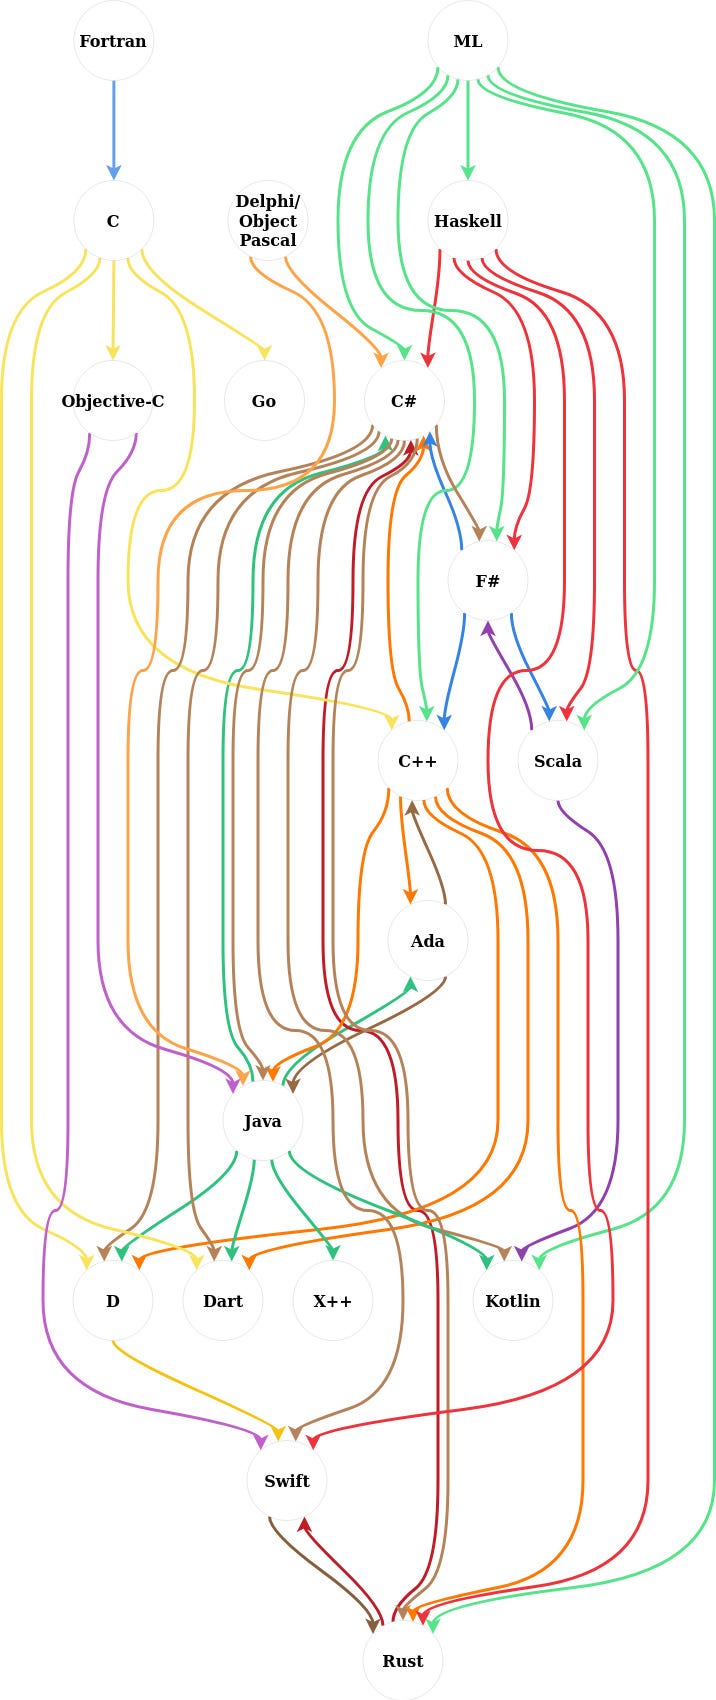 A flowchart with directed edges indicating which languages are said to have influenced which ones, according to Wikipedia entries on those languages.